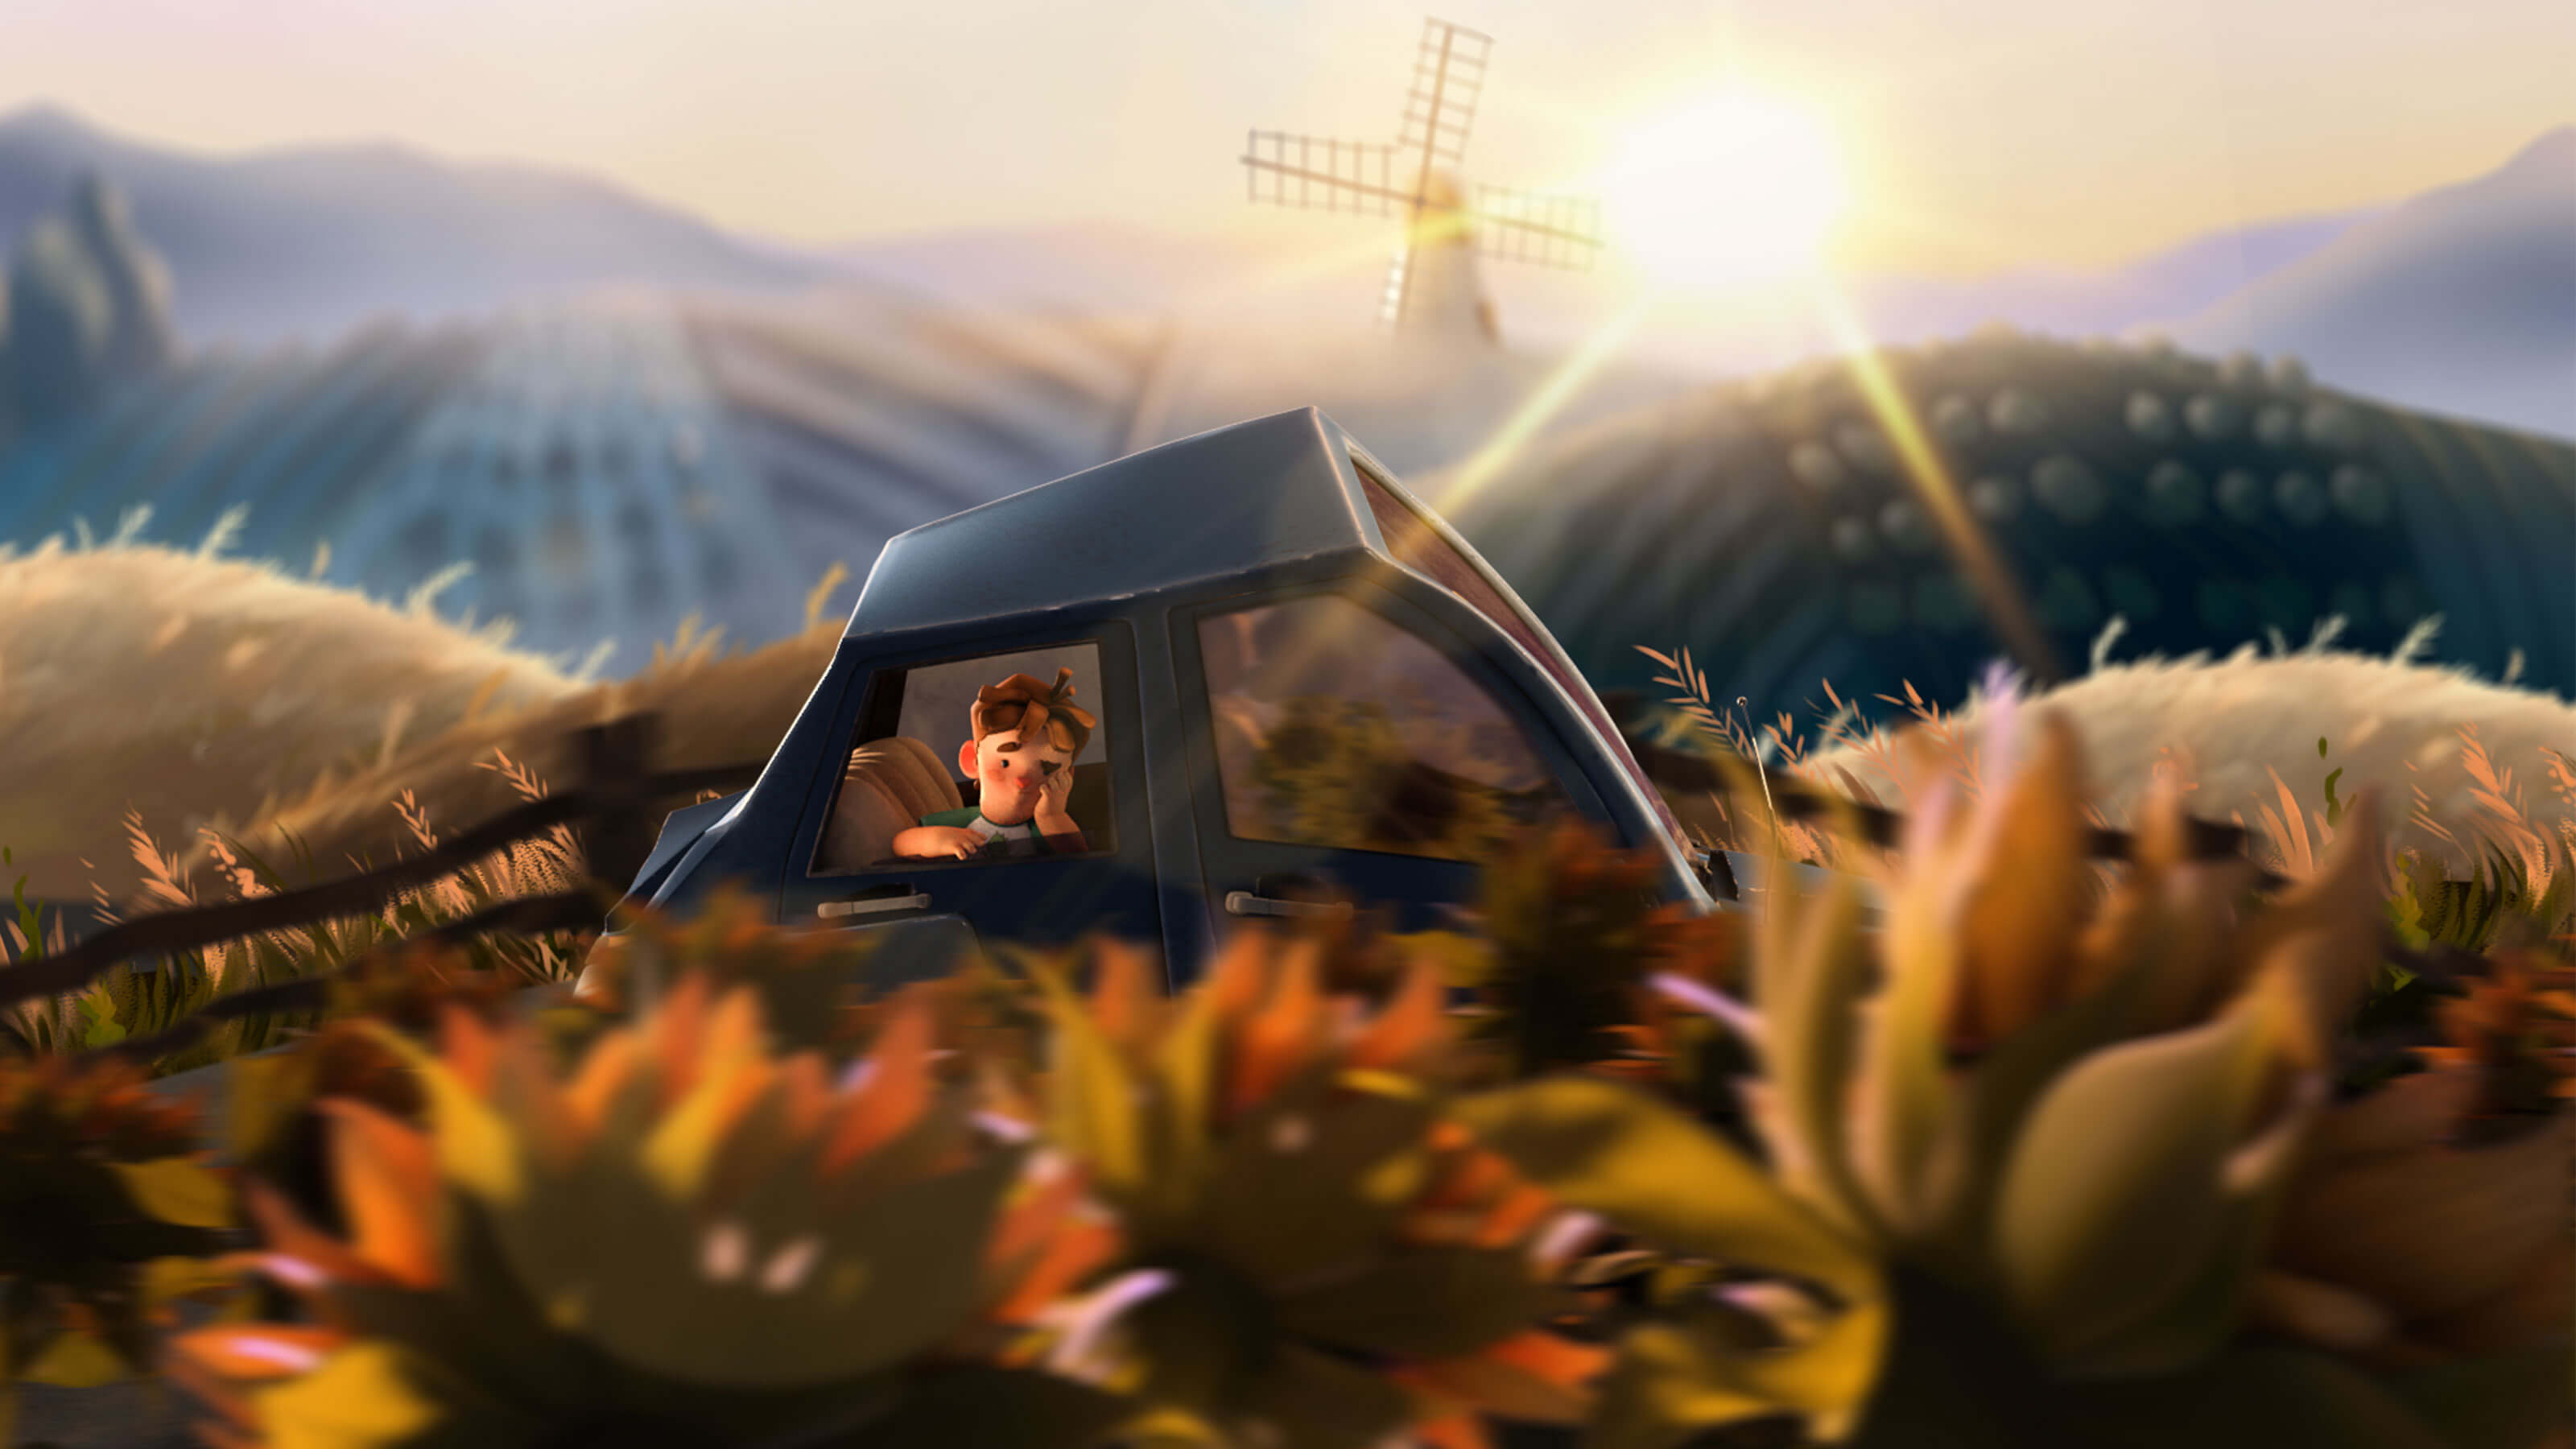 A bored boy looks out the window of a car that&#039;s passing through a series of hills with a windmill in the background